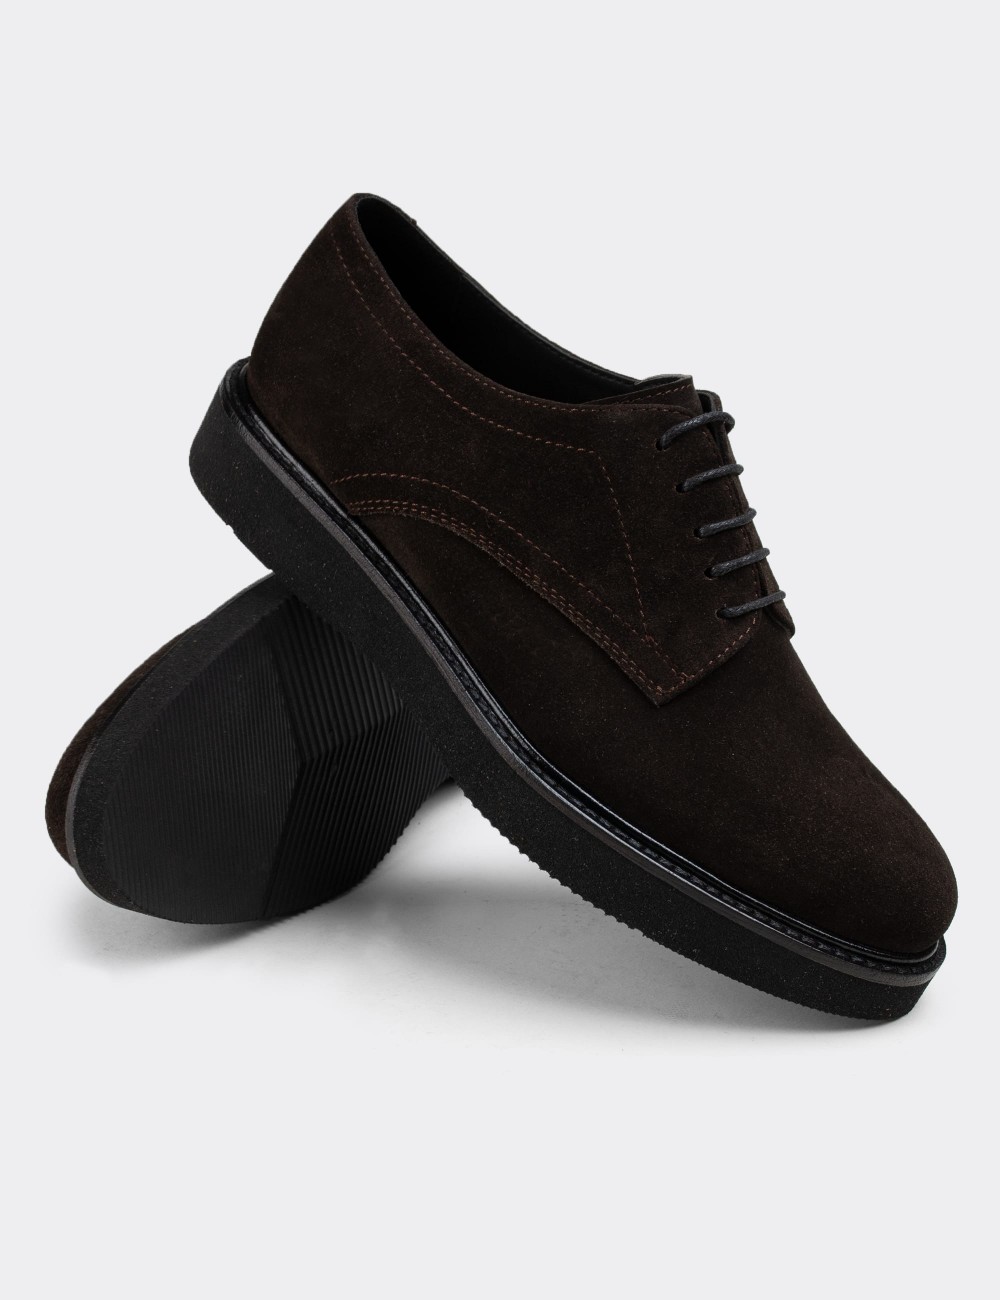 Brown Suede Leather Lace-up Shoes - 01430ZKHVE06